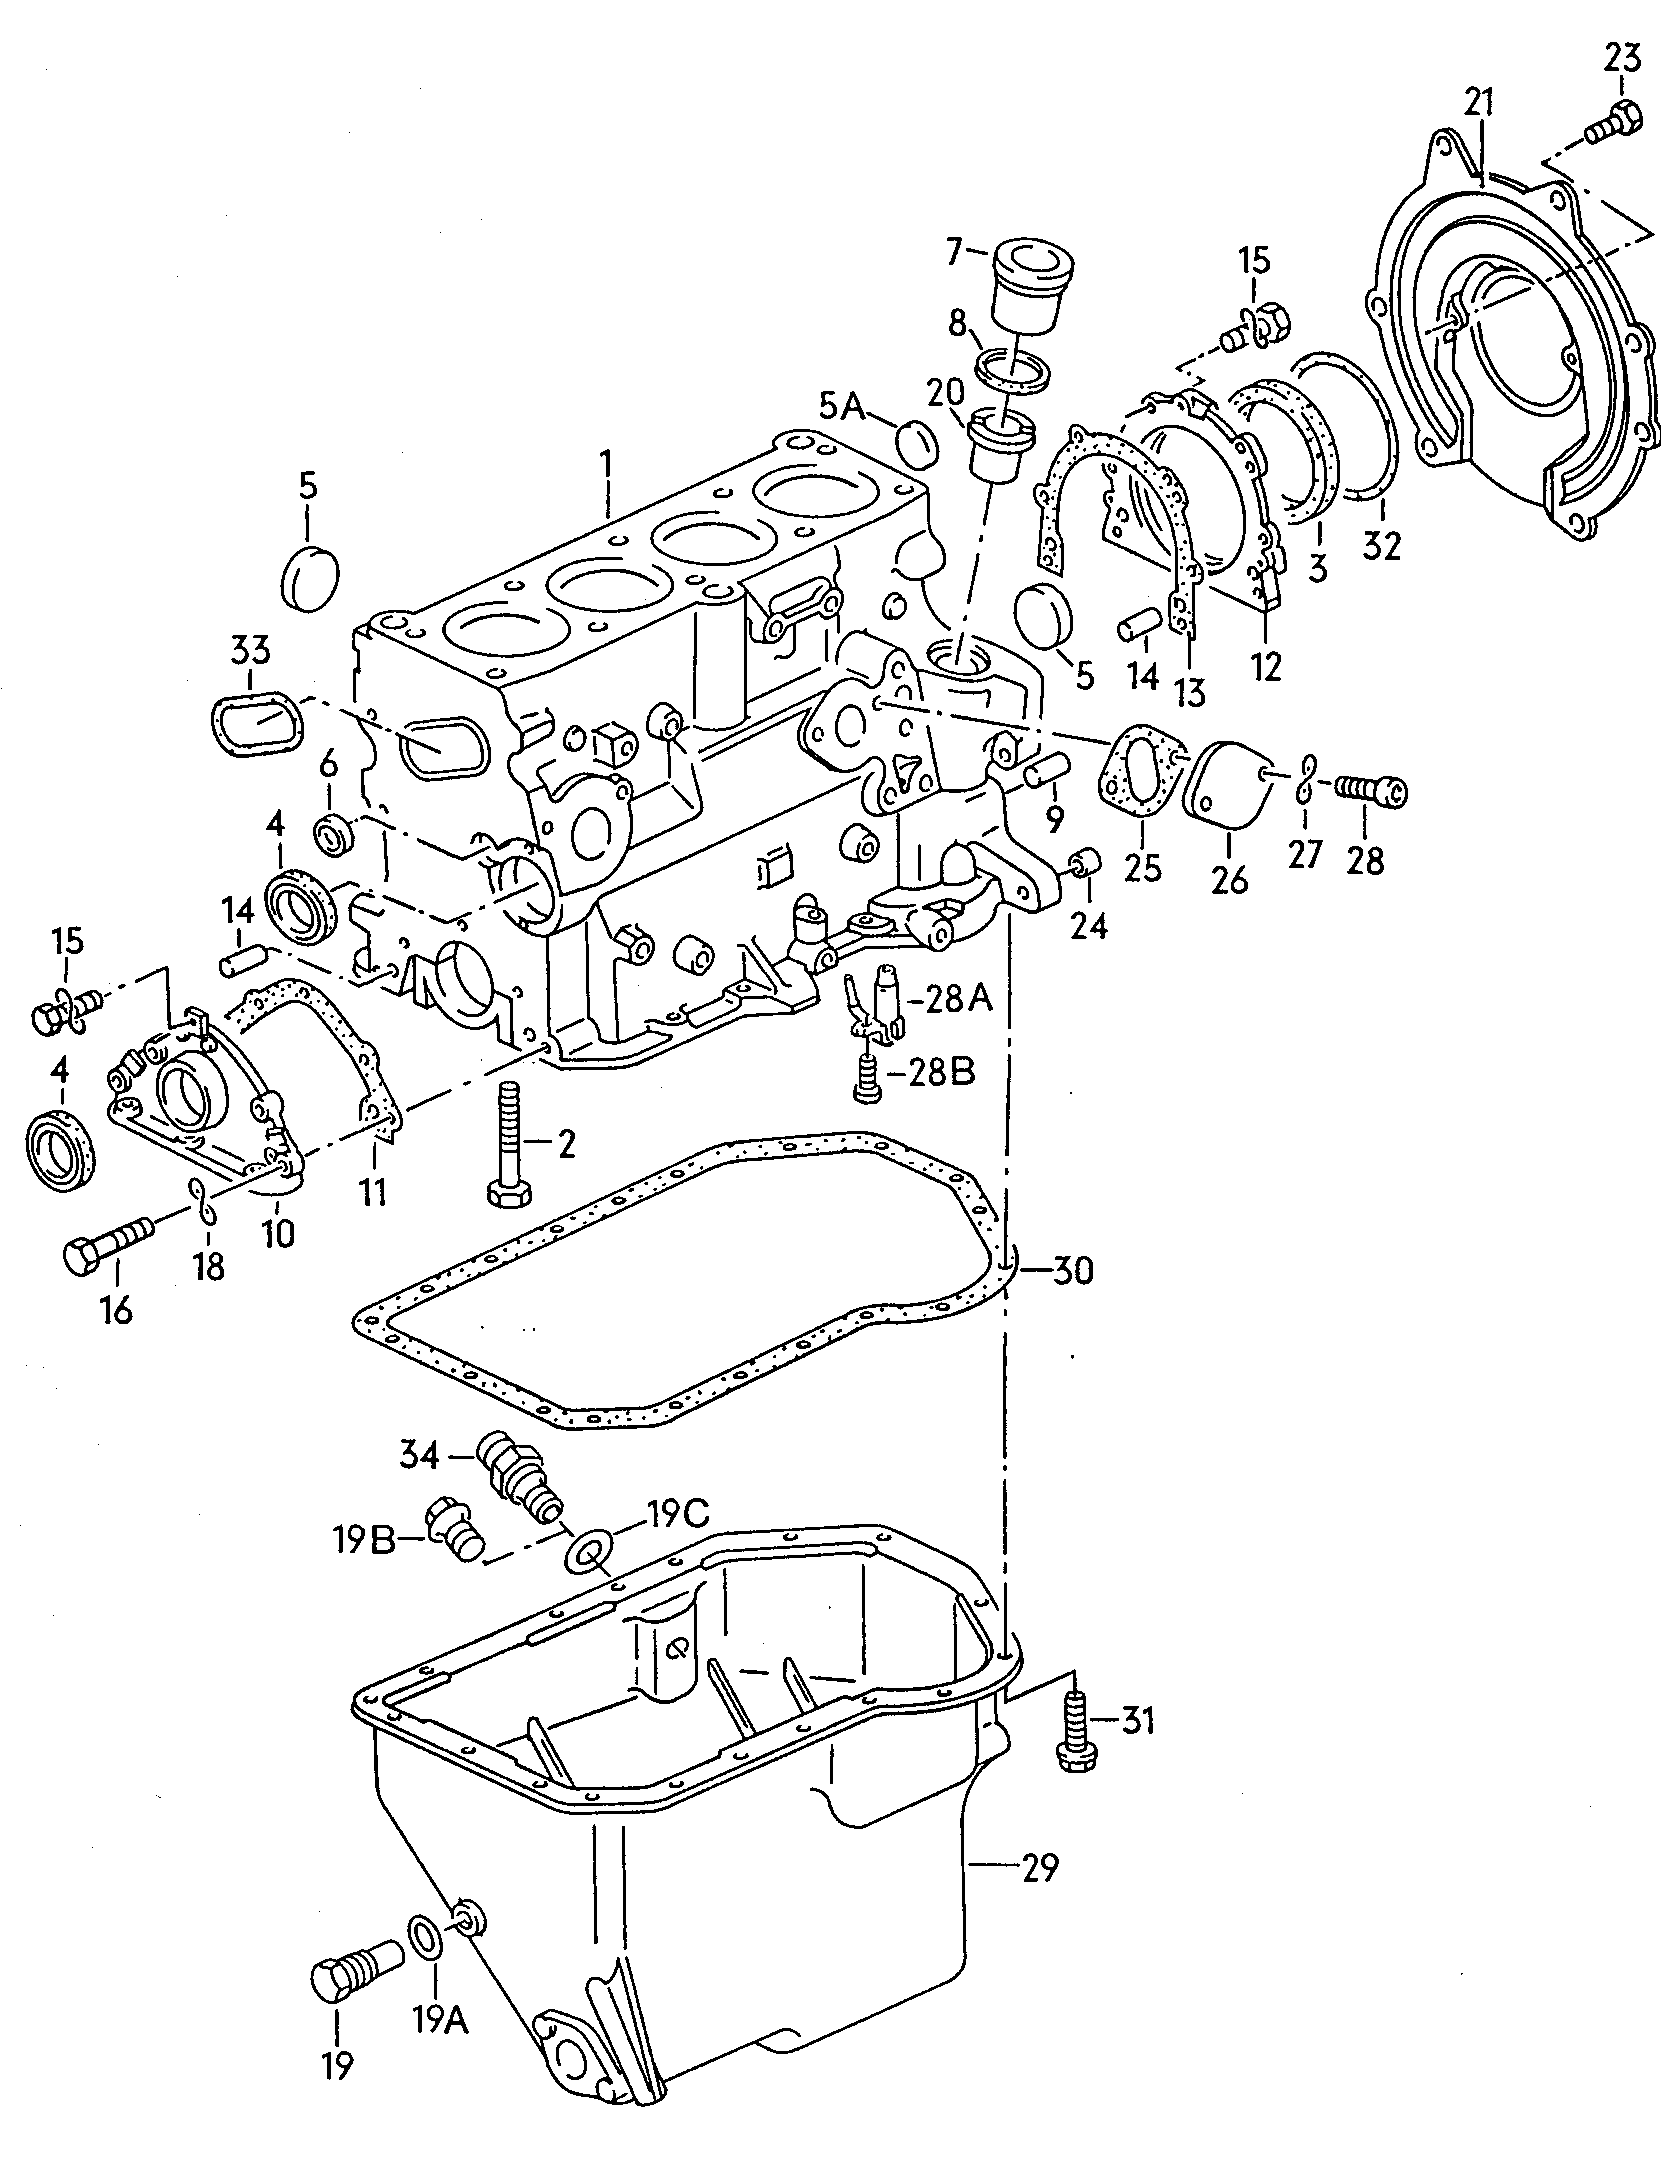 mounting parts for engine and<br>transmission  - Typ 2/syncro - t2